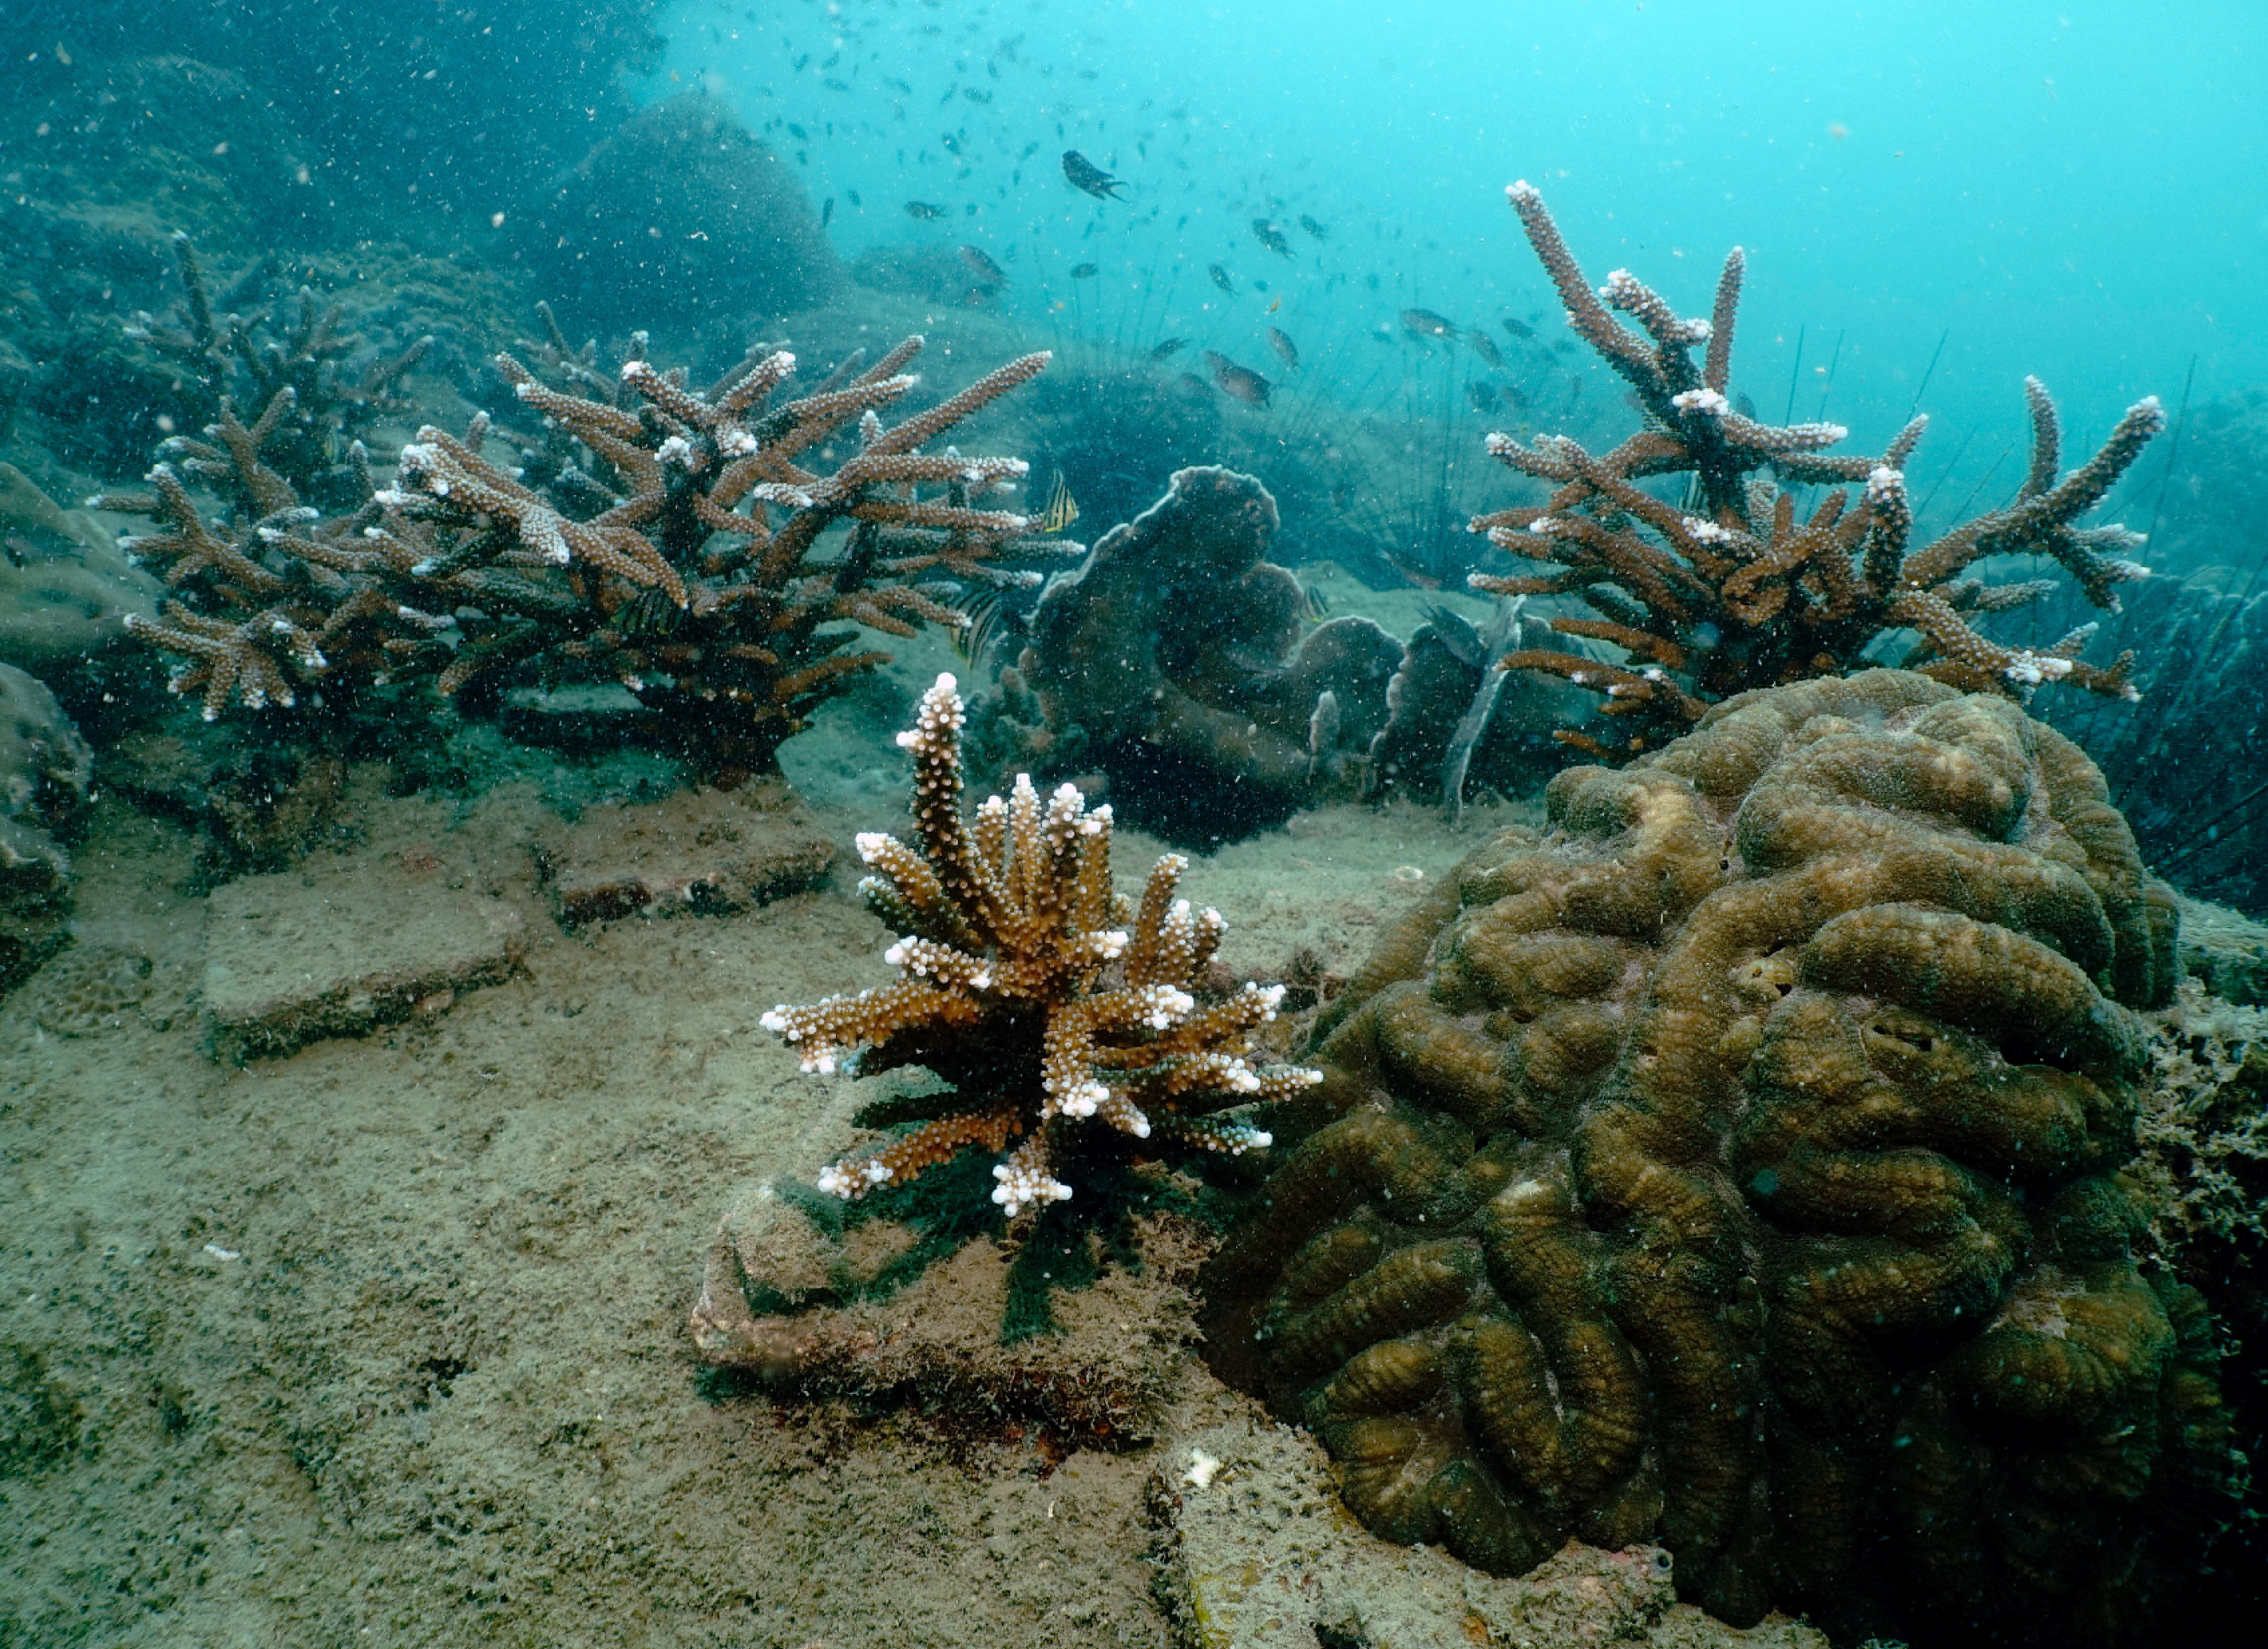 Replenished staghorn corals are seen in the waters off Man Nai Island